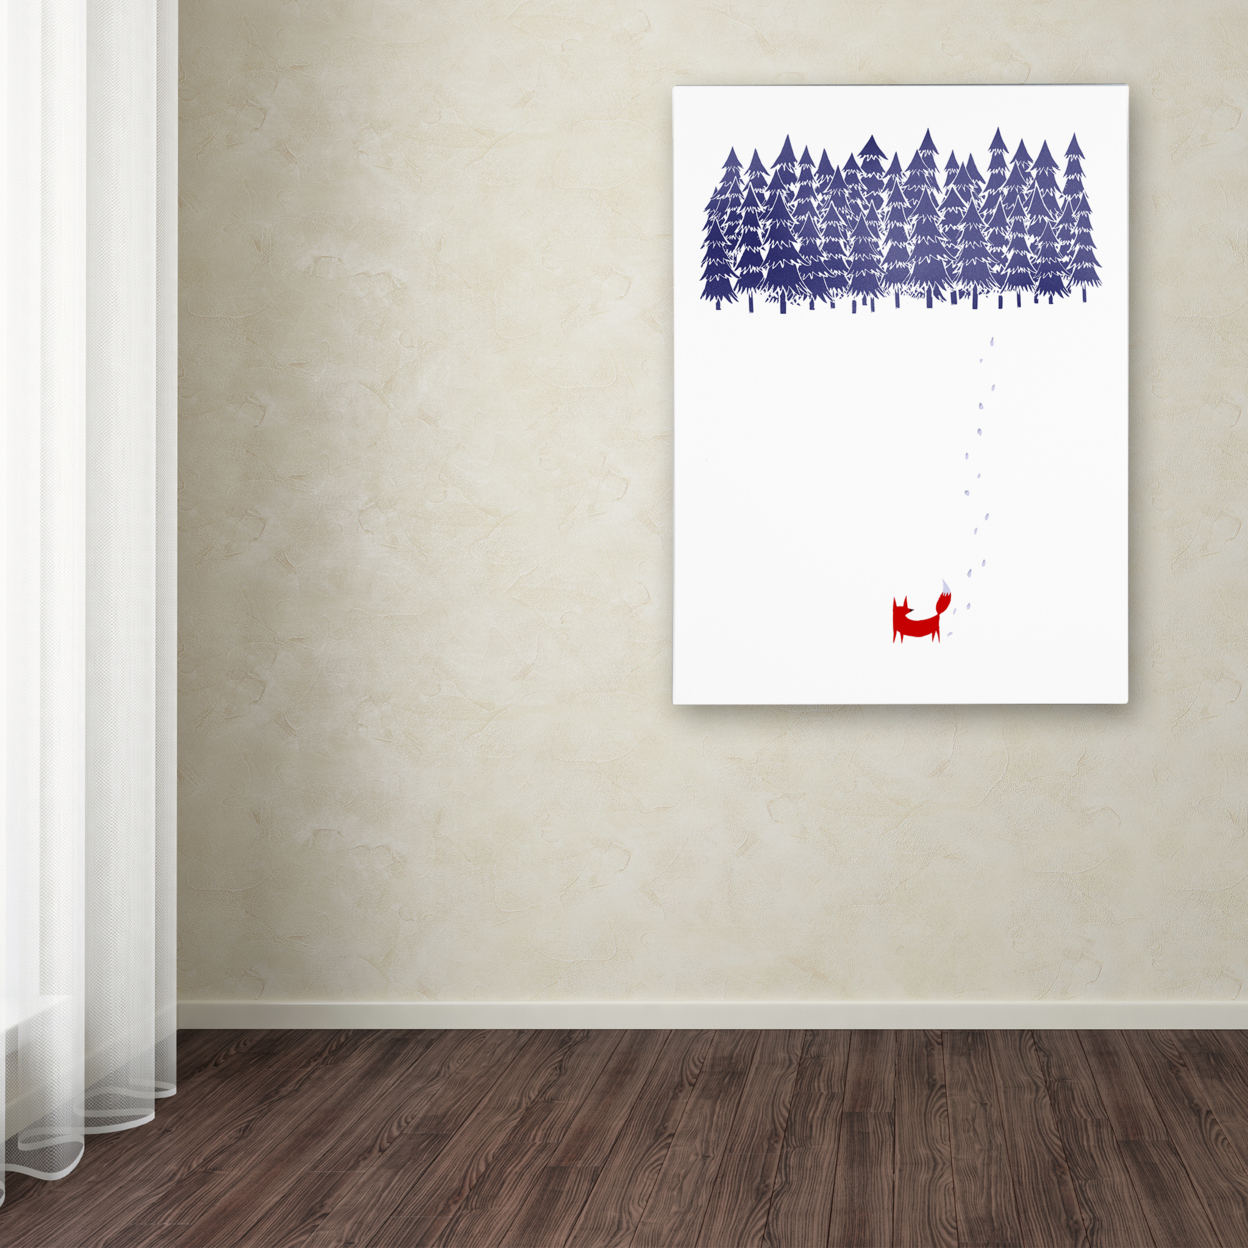 Robert Farkas 'Alone In The Forest' Canvas Art 18 X 24